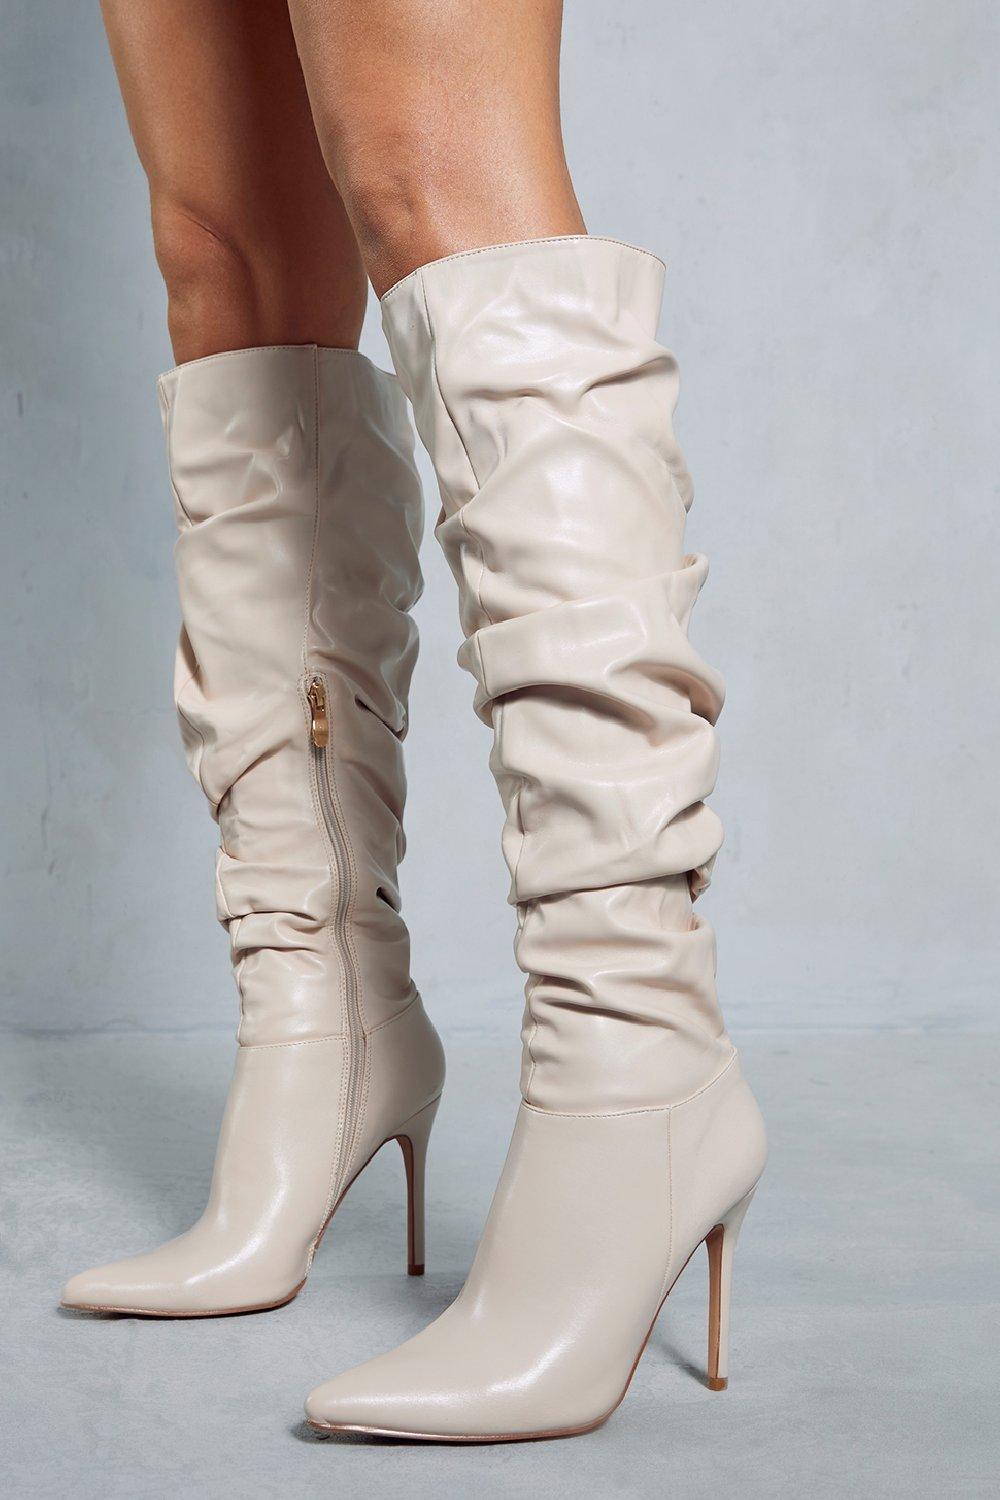 womens leather look ruched heeled boots - cream - 3, cream